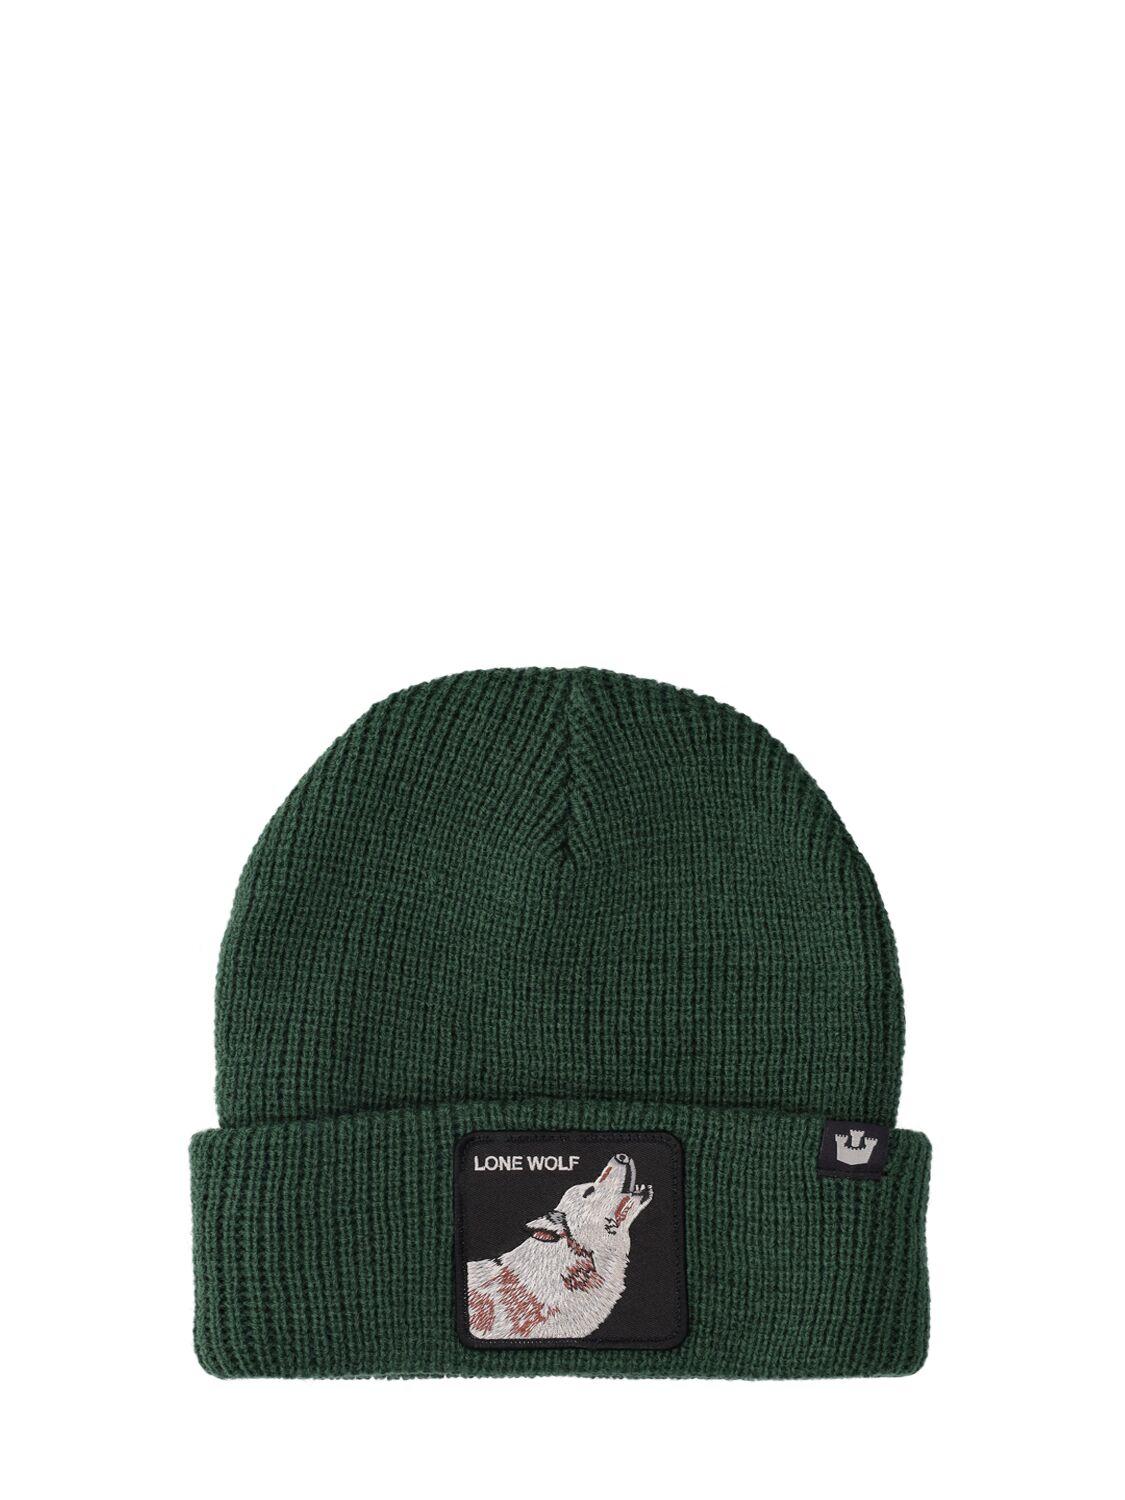 Singled Out Knit Beanie